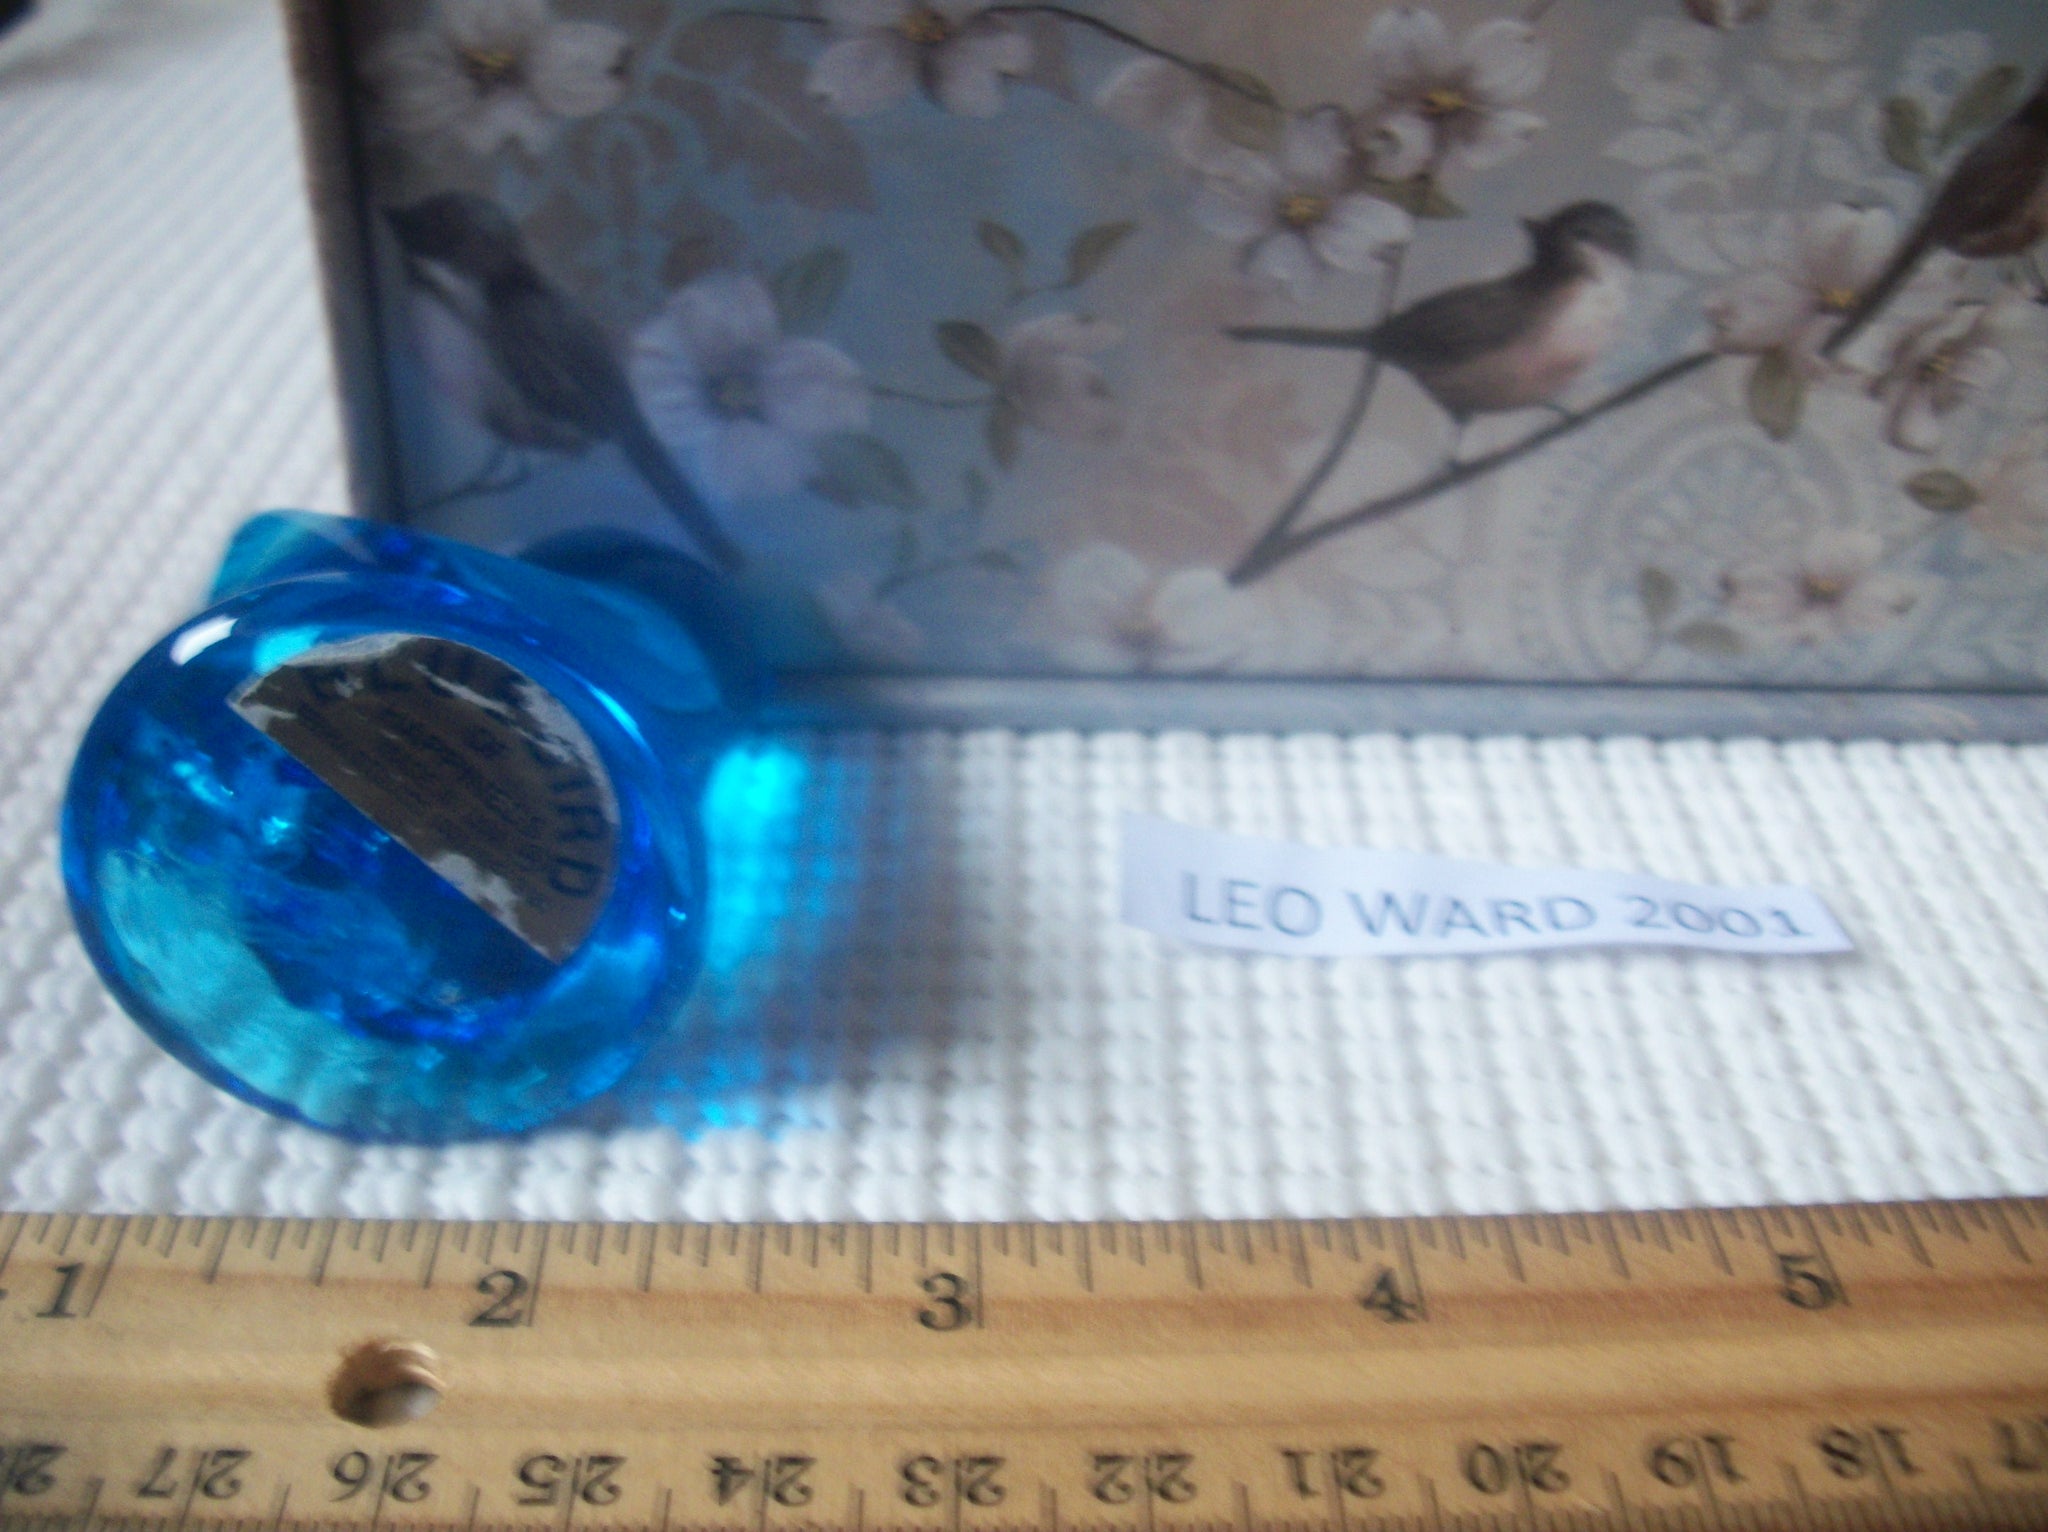 Vintage Small Blue Glass Marked Leo Ward 2001 Blue Bird Of Happiness, Bookcase Decor, Bedside Table, Collectible, Gift for Bird Lover C300